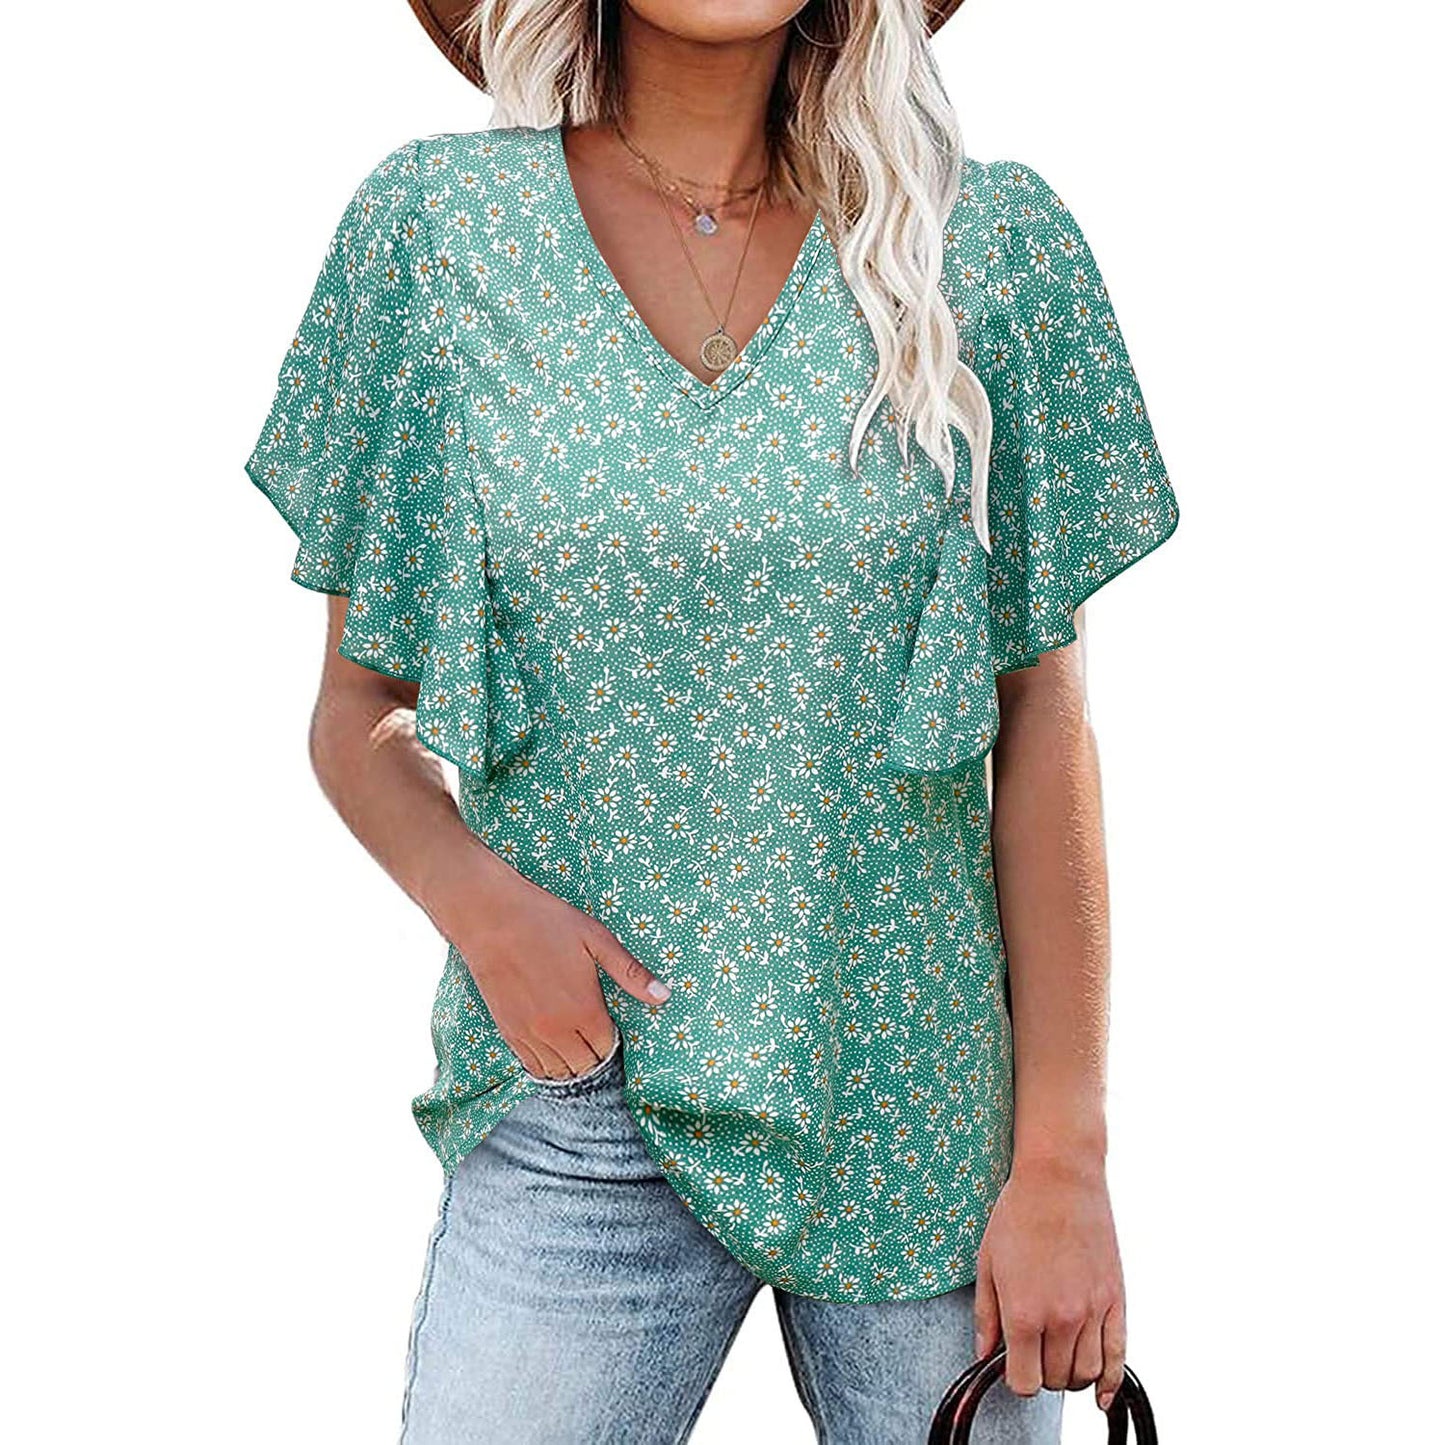 New V-neck floral pleated shirt casual short-sleeved tunic top for women